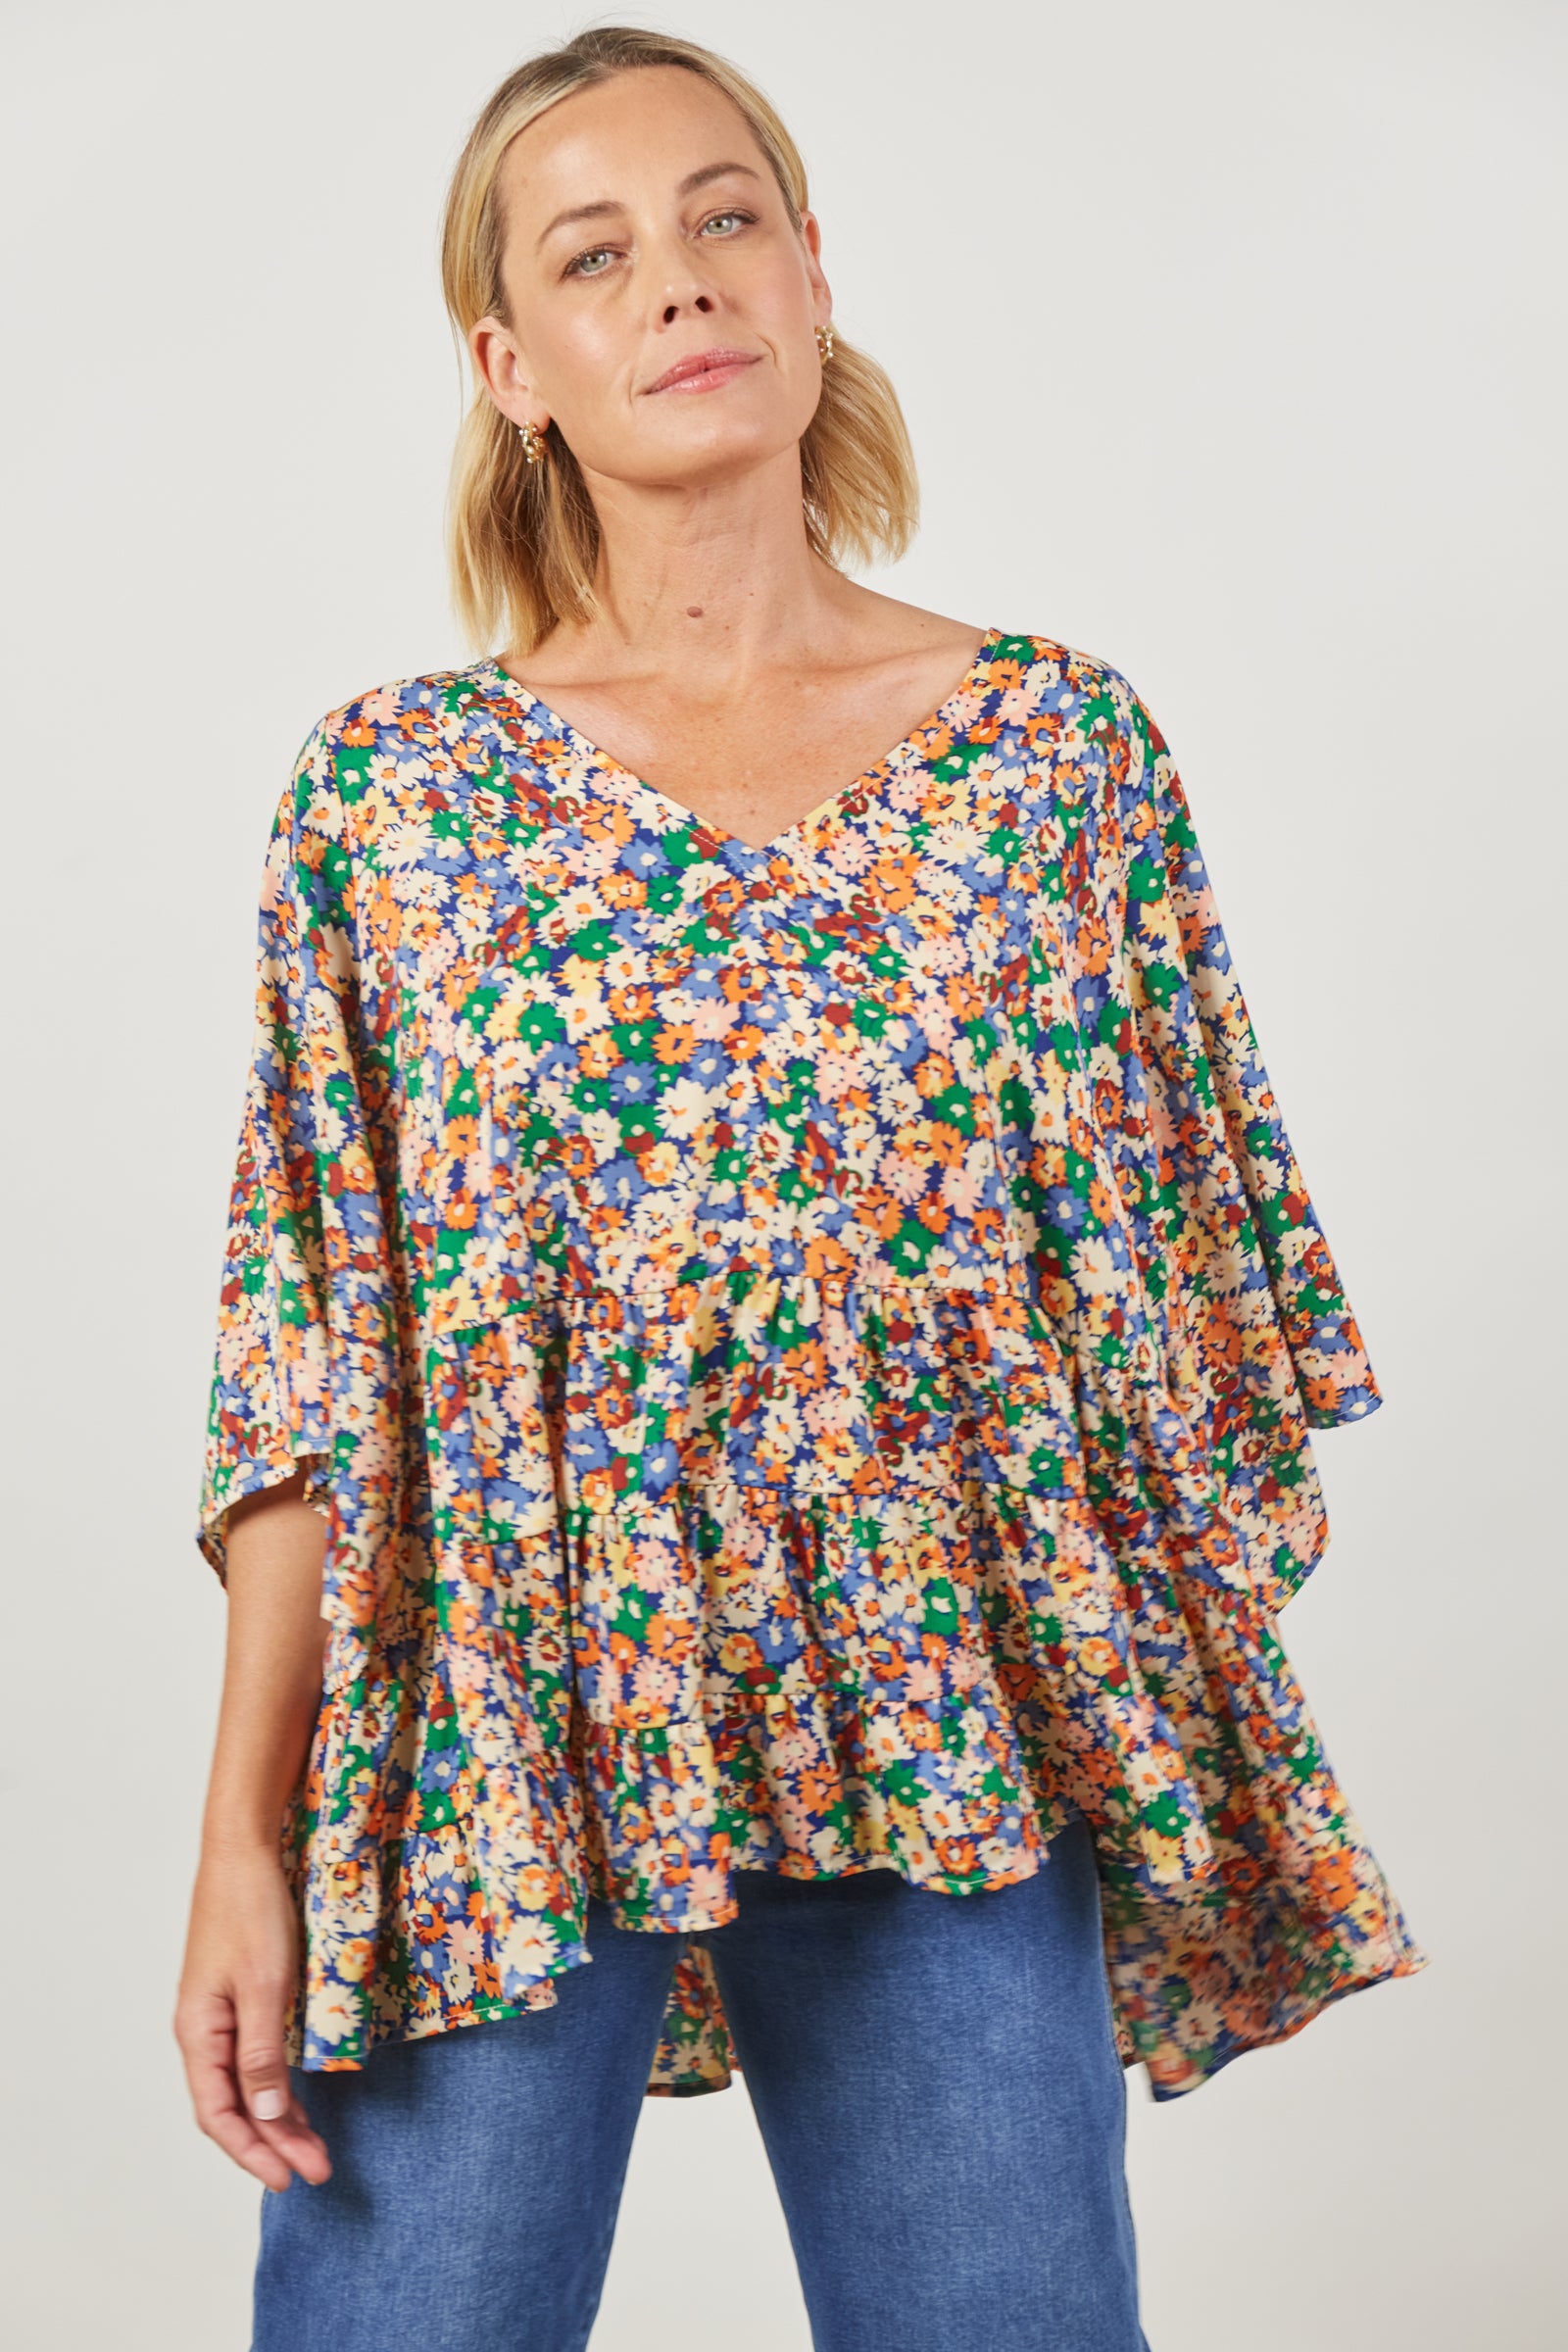 Romance Relax Top - Meadow Bloom - Isle of Mine Clothing - Top L/S One Size